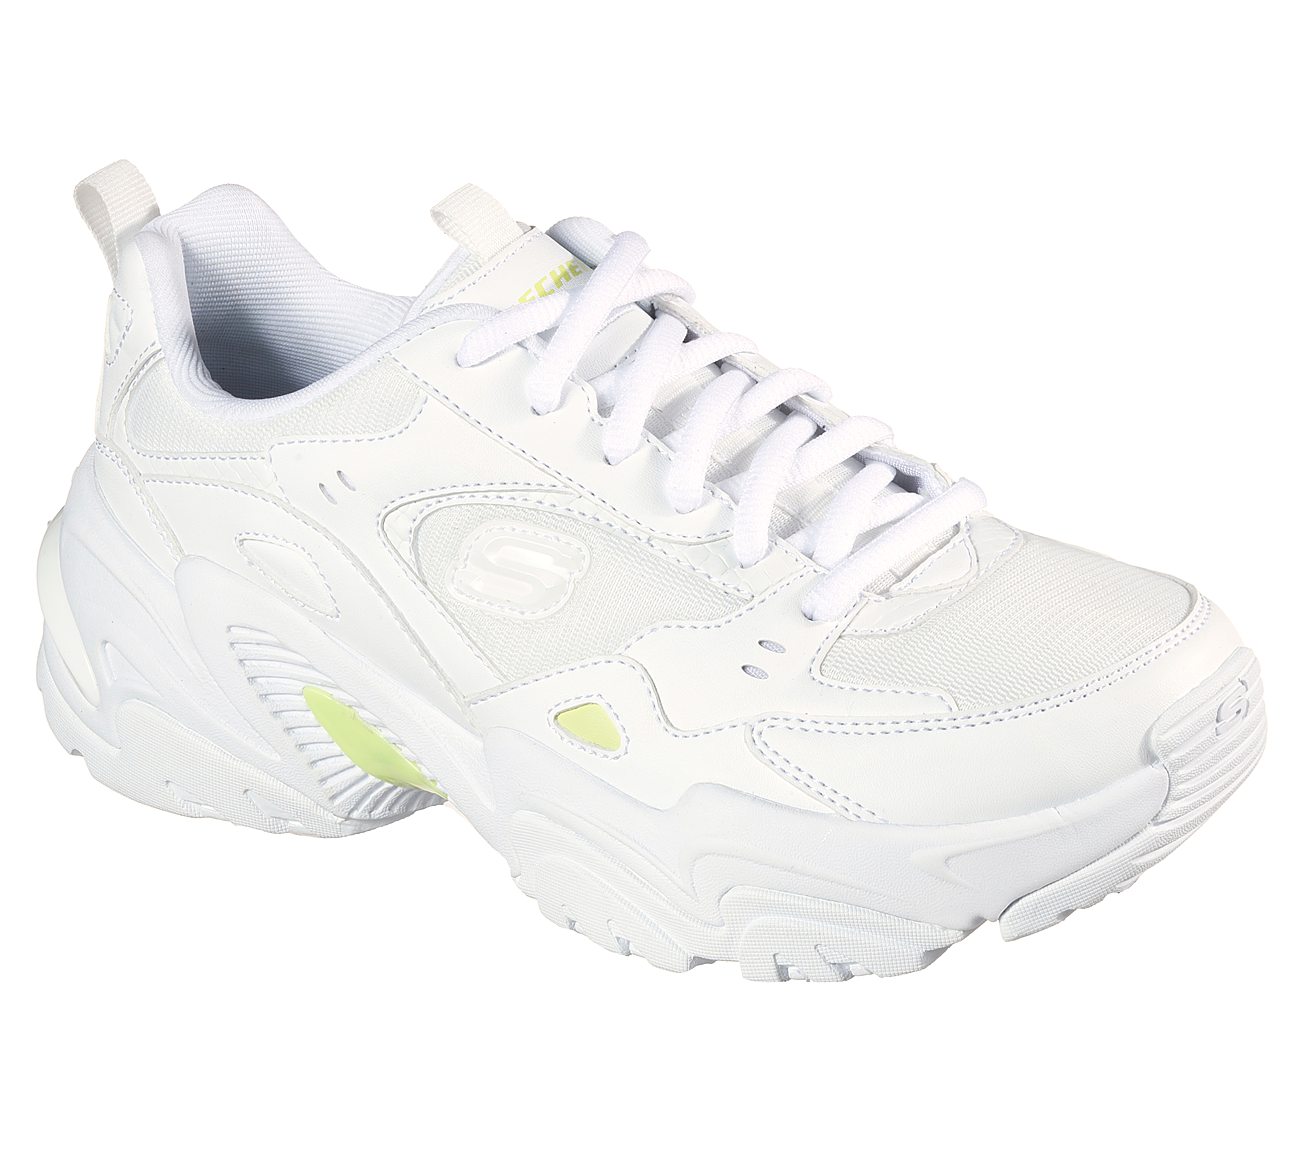 STAMINA V2-THE RISE UP, WHITE/LIME Footwear Lateral View